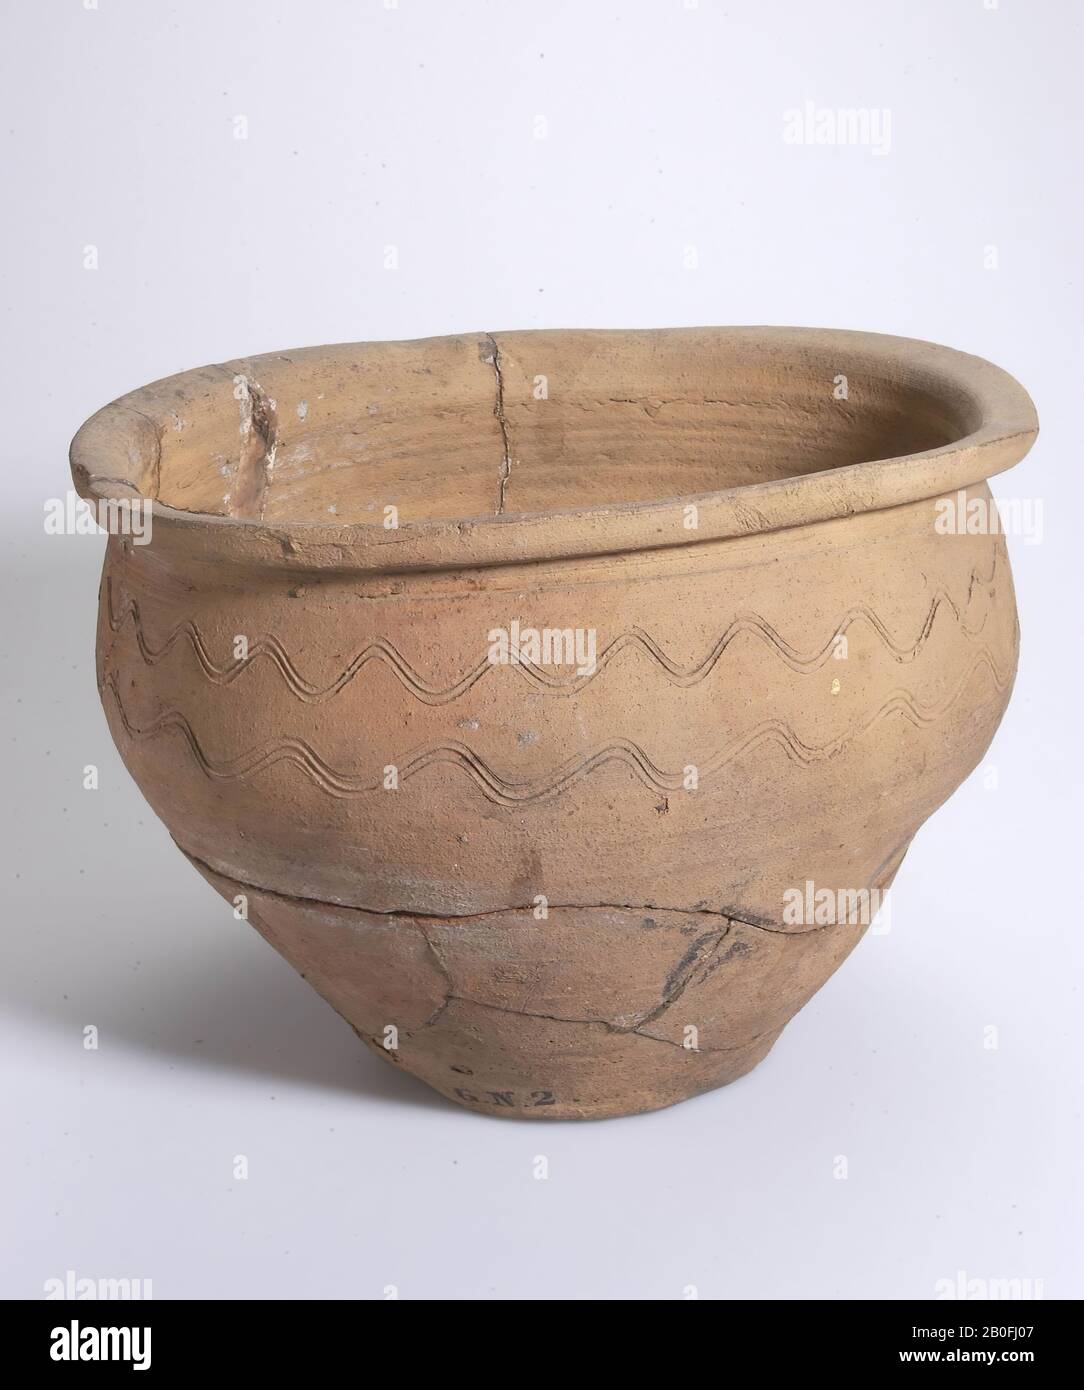 Pot or urn of baked earth, yellow-brown, on the thicker parts the inner has remained somewhat blackish, slightly rounded, round, without foot, from the bottom of the bottom. To the belly two wavy lines, grooved into the surface before baking. Broken but recovered again. Only bondings., Pot, cooking pot, earthenware (Frankish), h: 21.2 cm, diam: 29.1 cm, vmeb 400-500 AD, Netherlands, Gelderland, Barneveld, Garderen Stock Photo